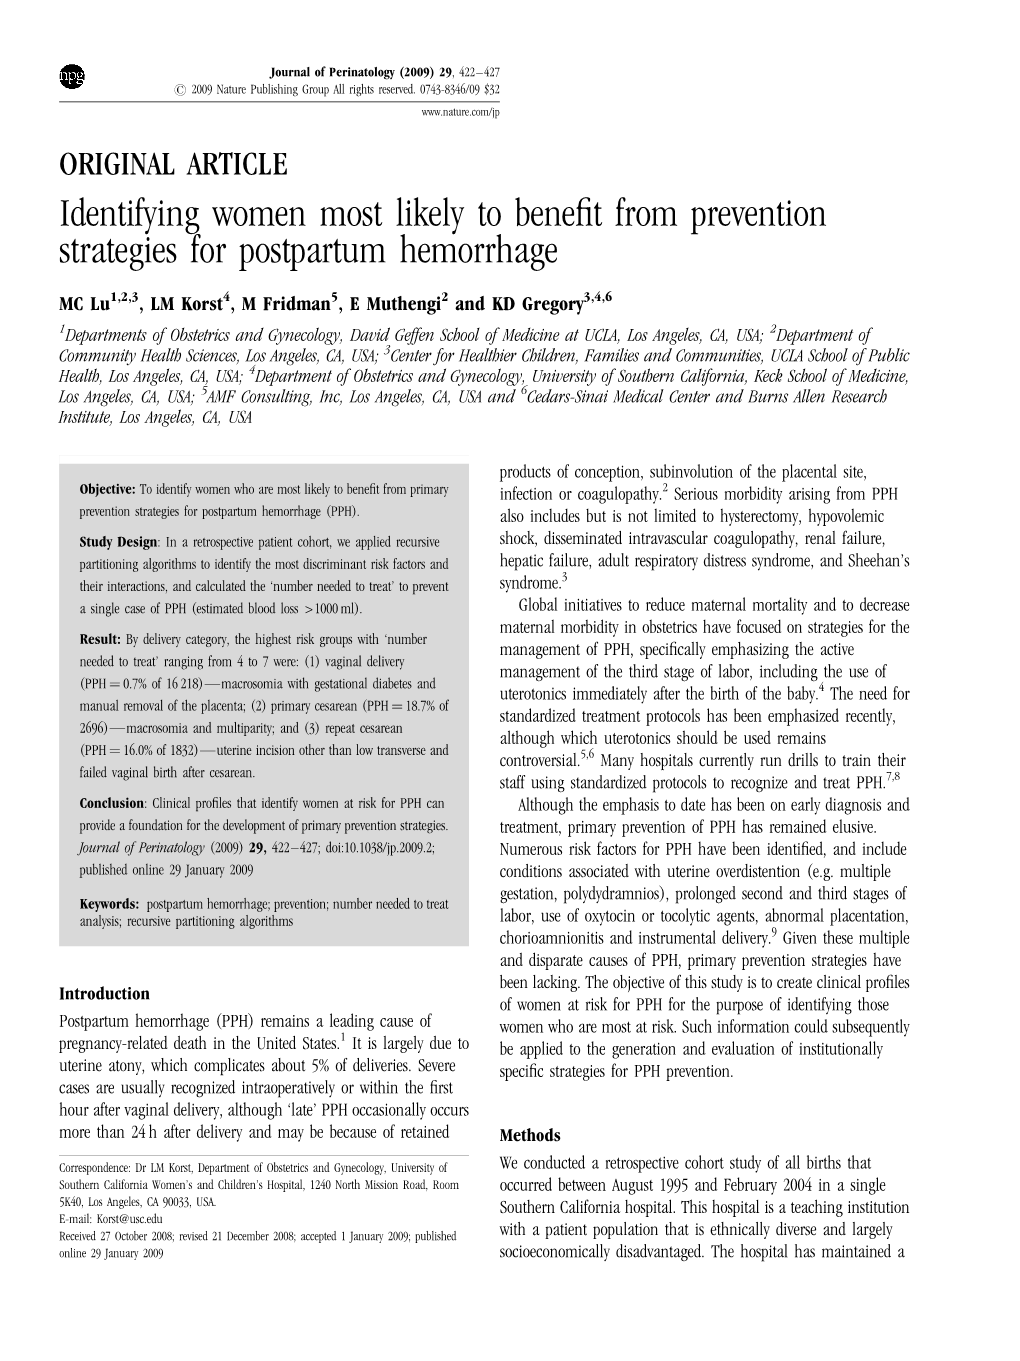 Identifying Women Most Likely to Benefit from Prevention Strategies